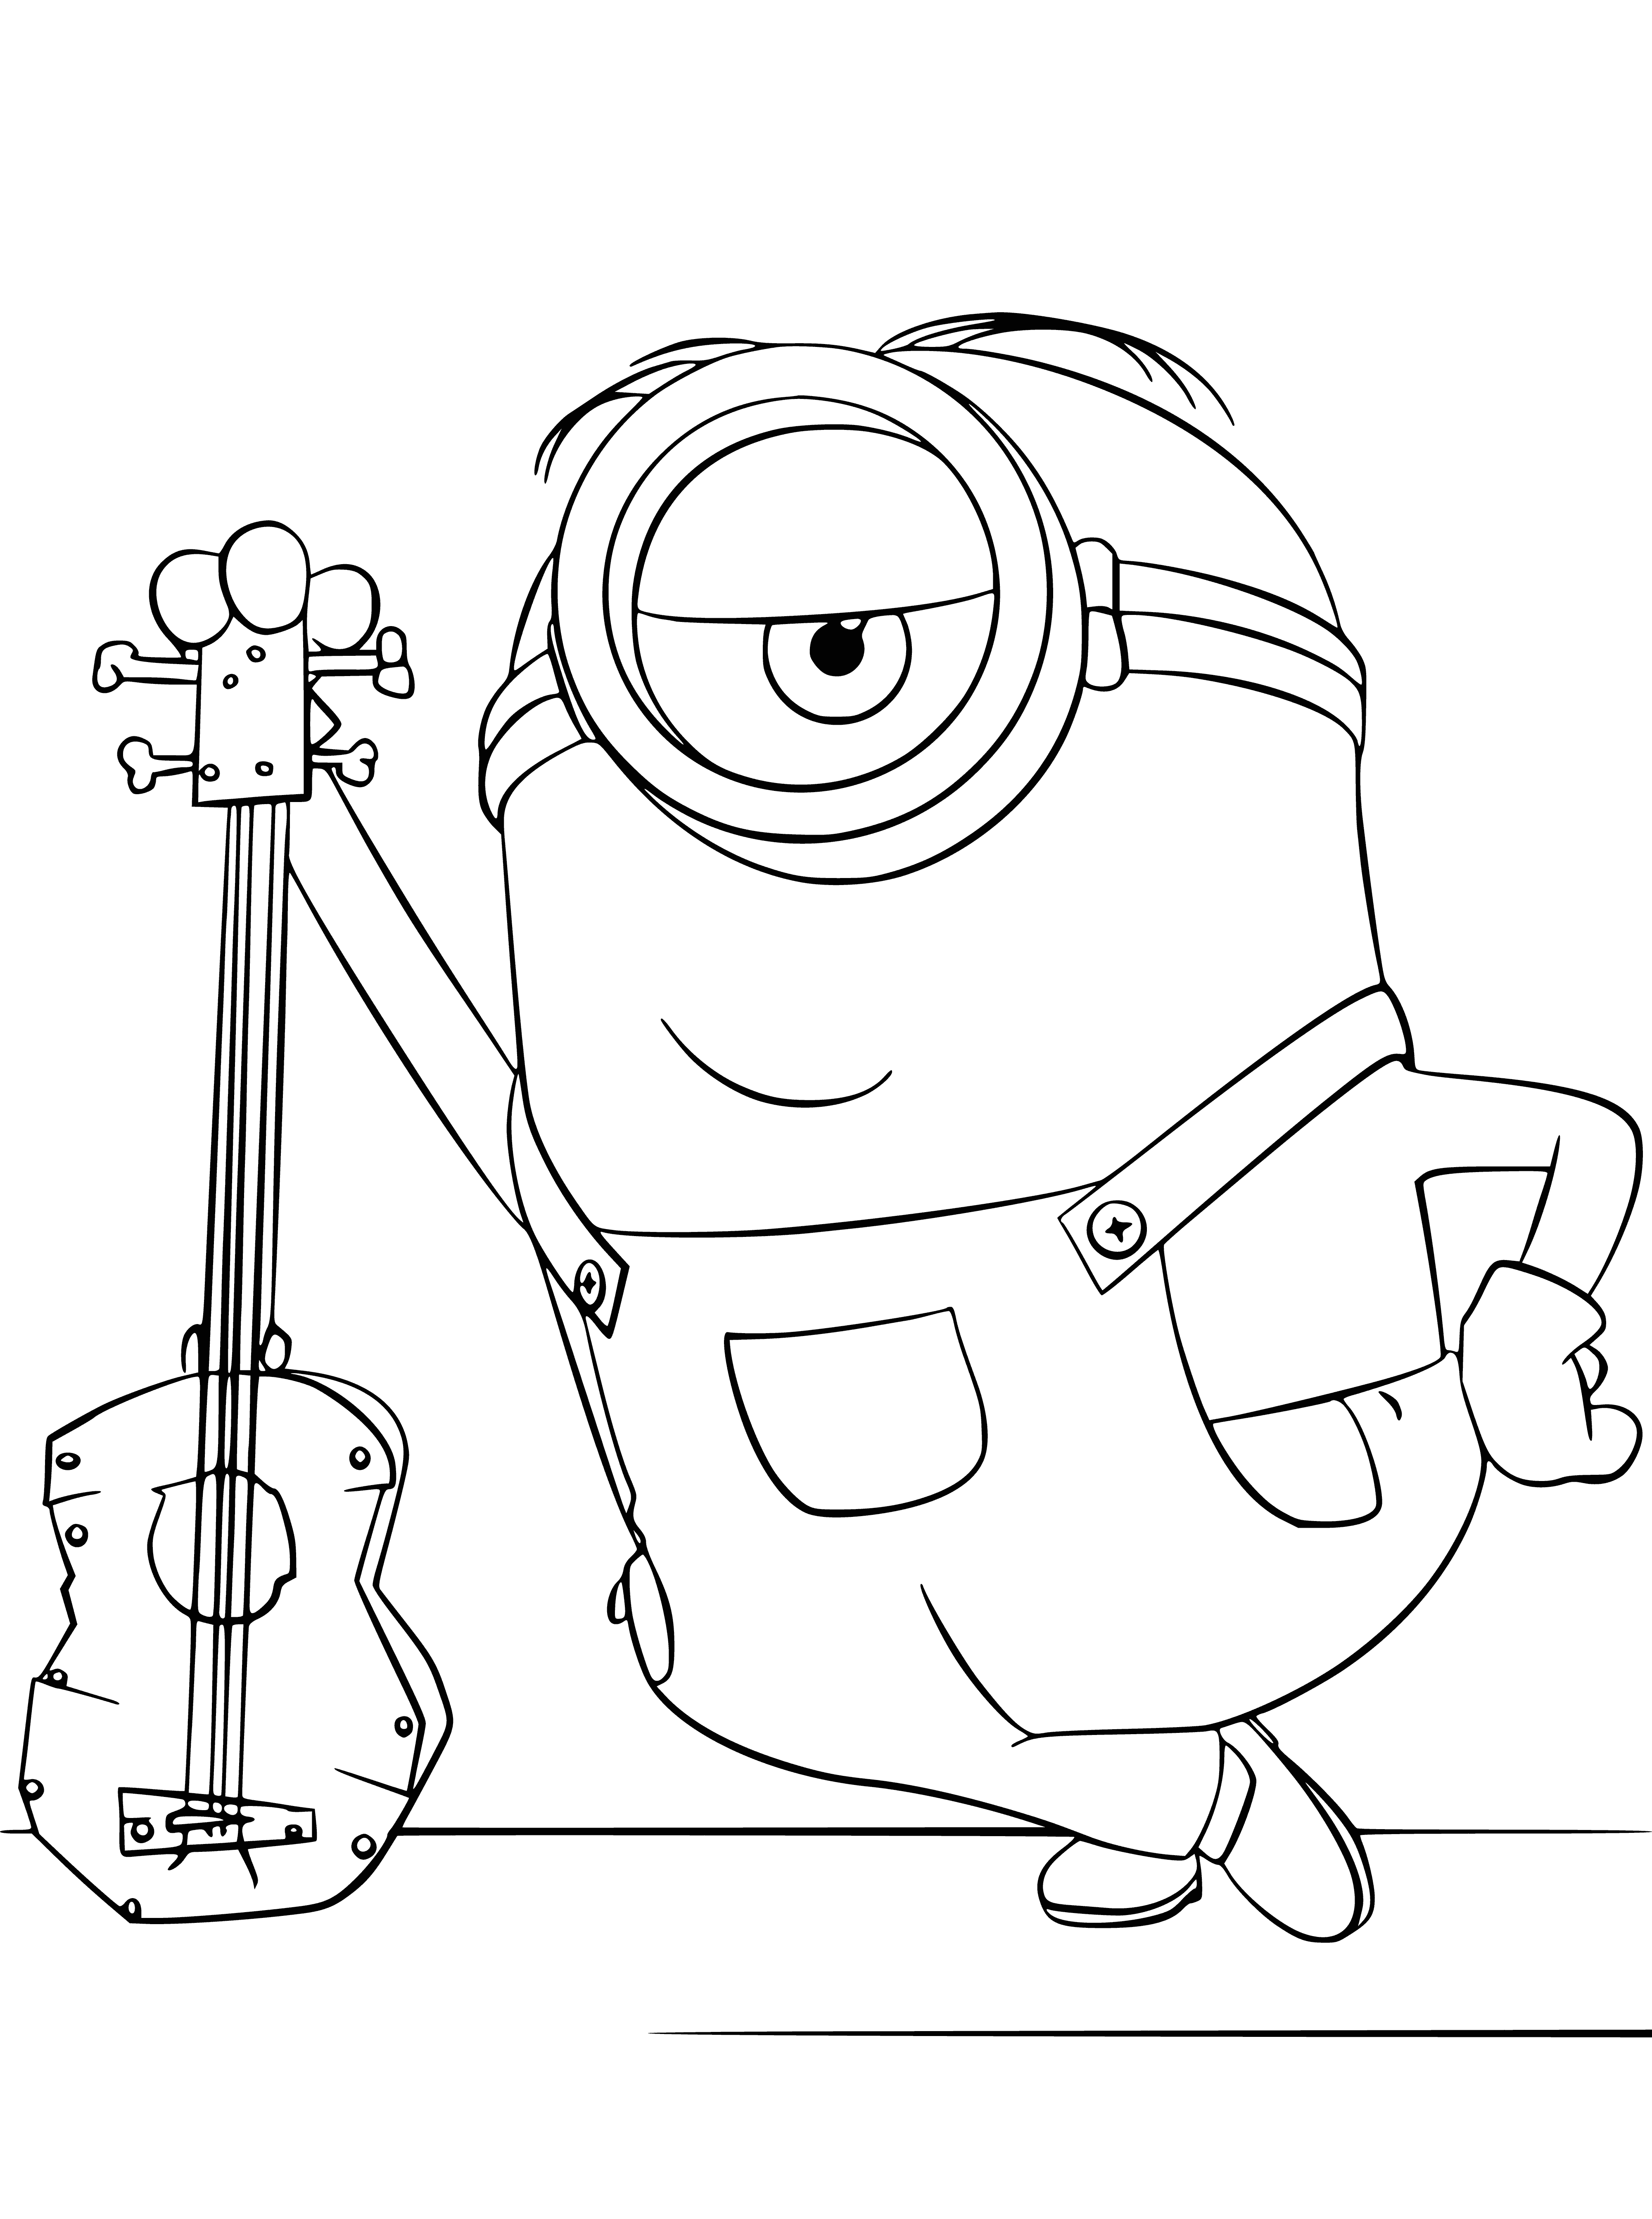 Minion Stewart with a guitar coloring page